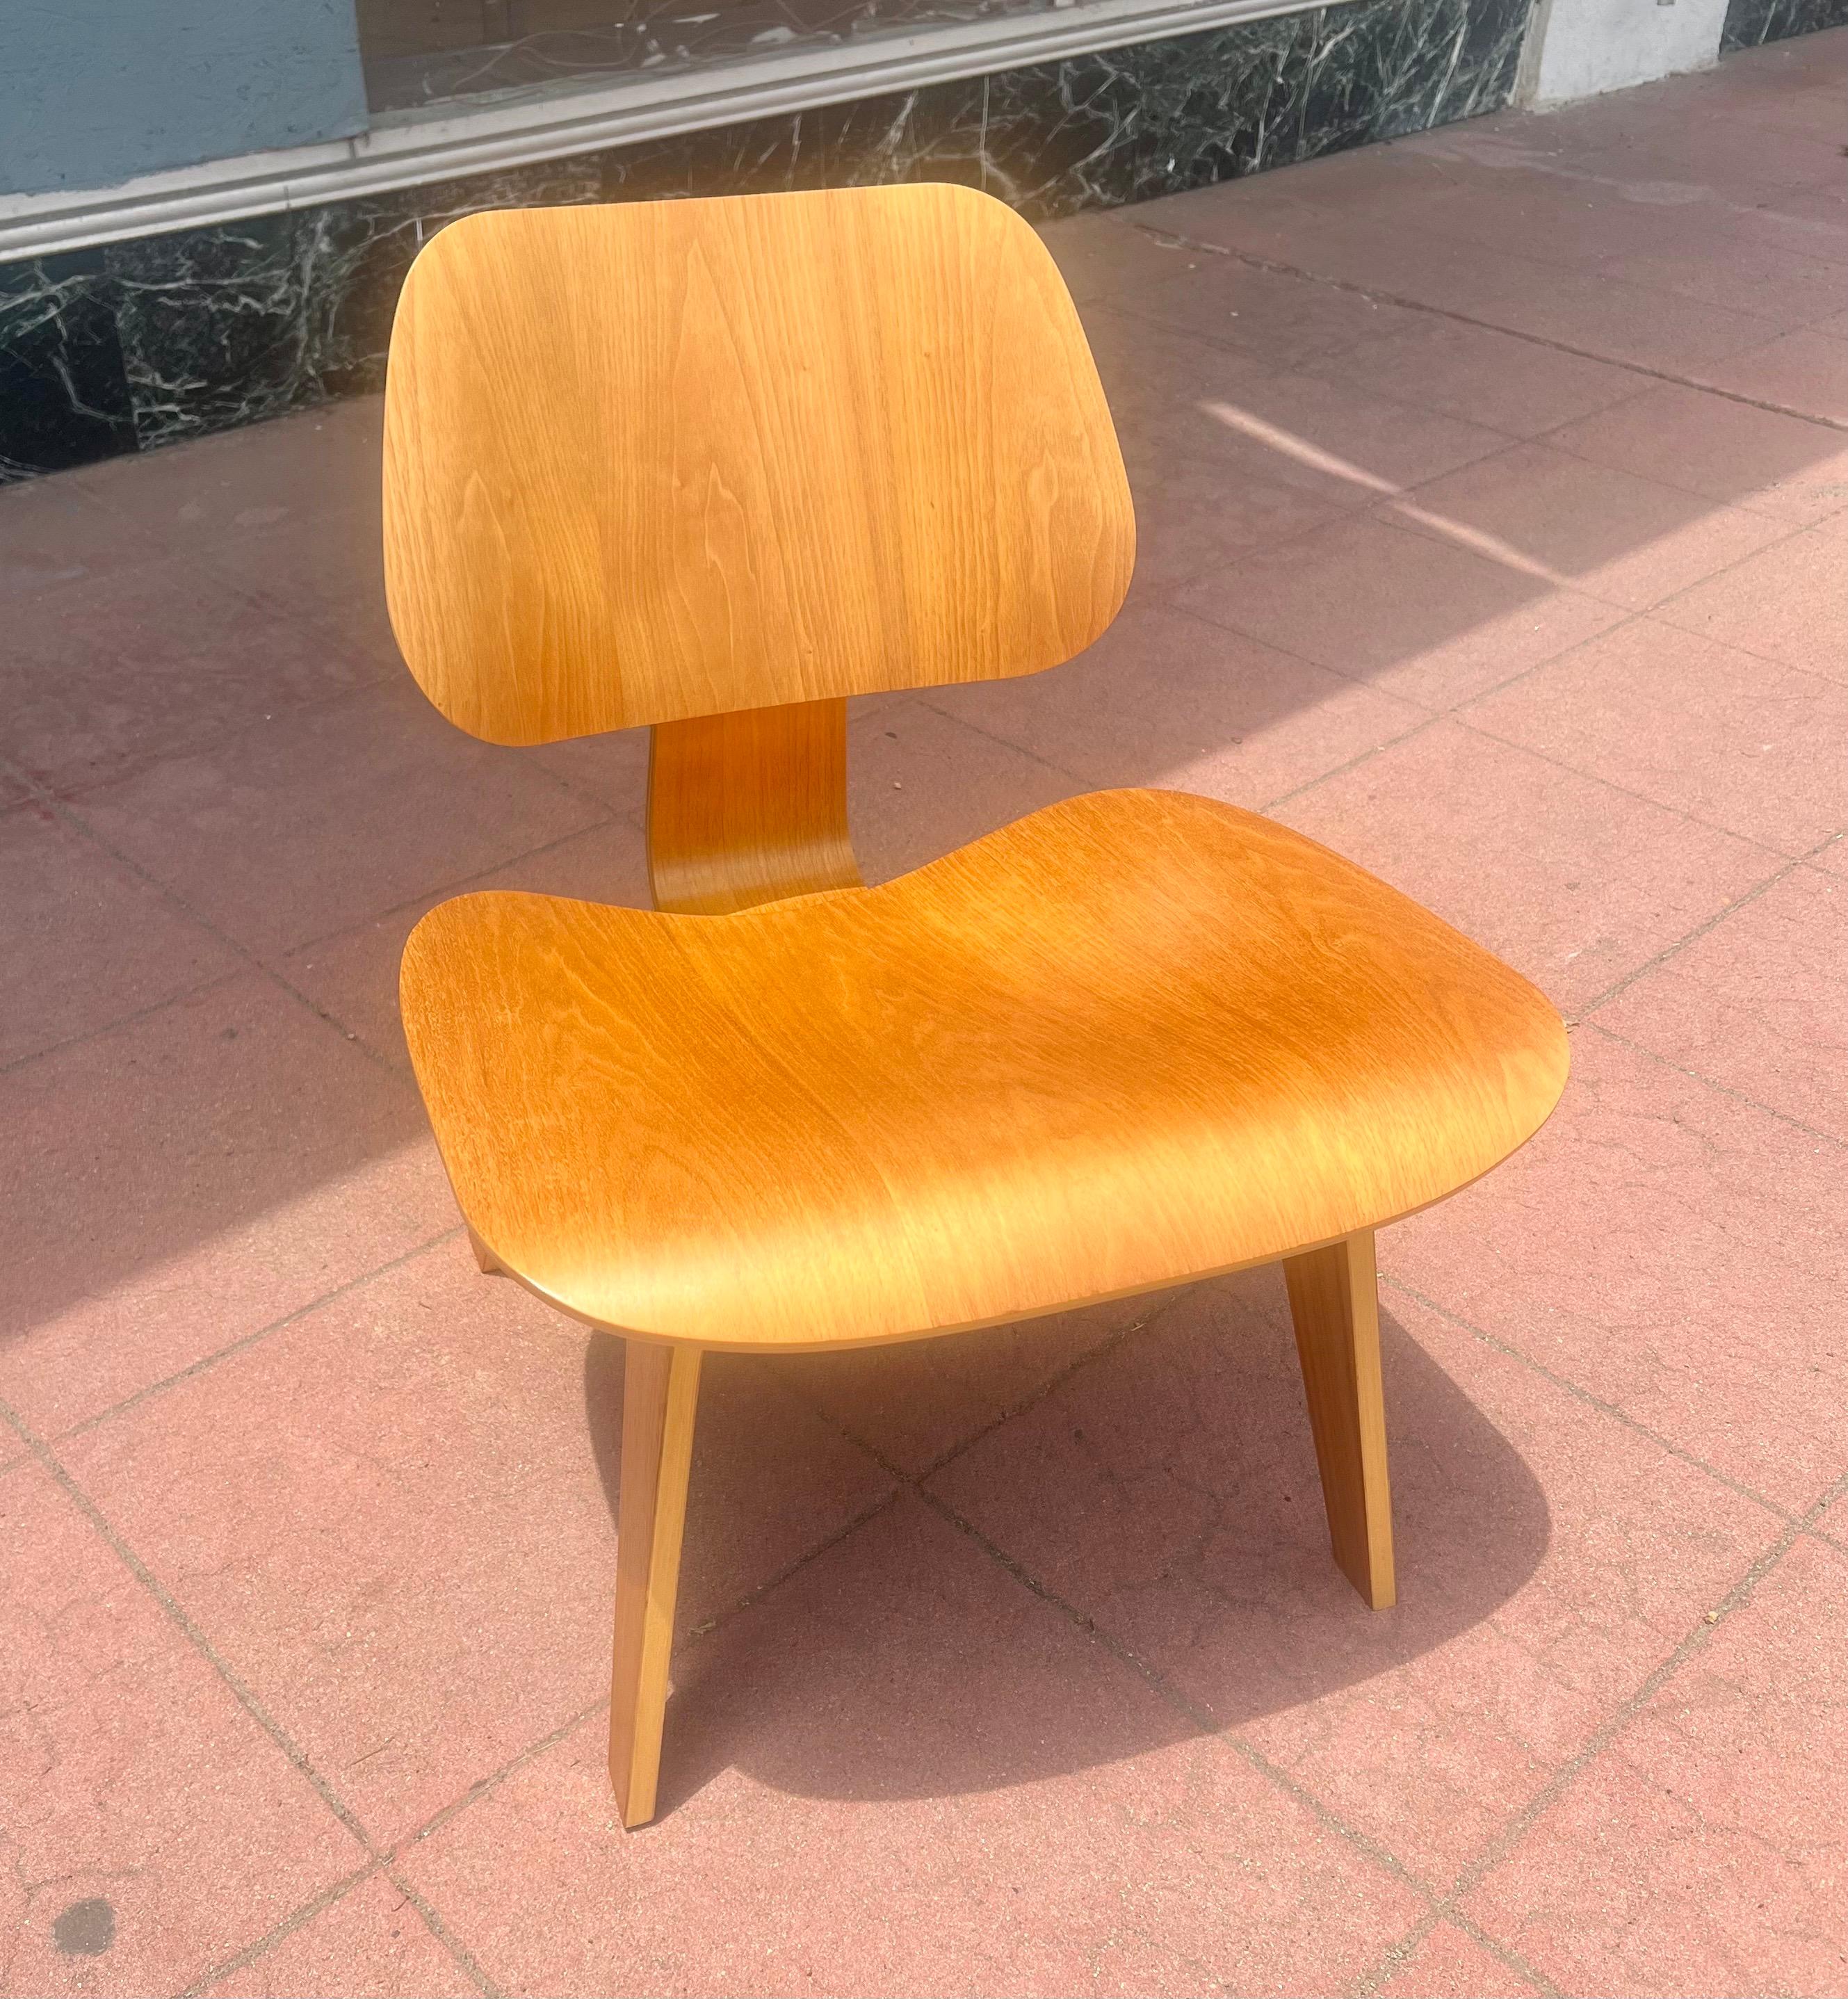 20th Century Iconic Pair of LCW Chairs Designed by Charles Eames for Herman Miller